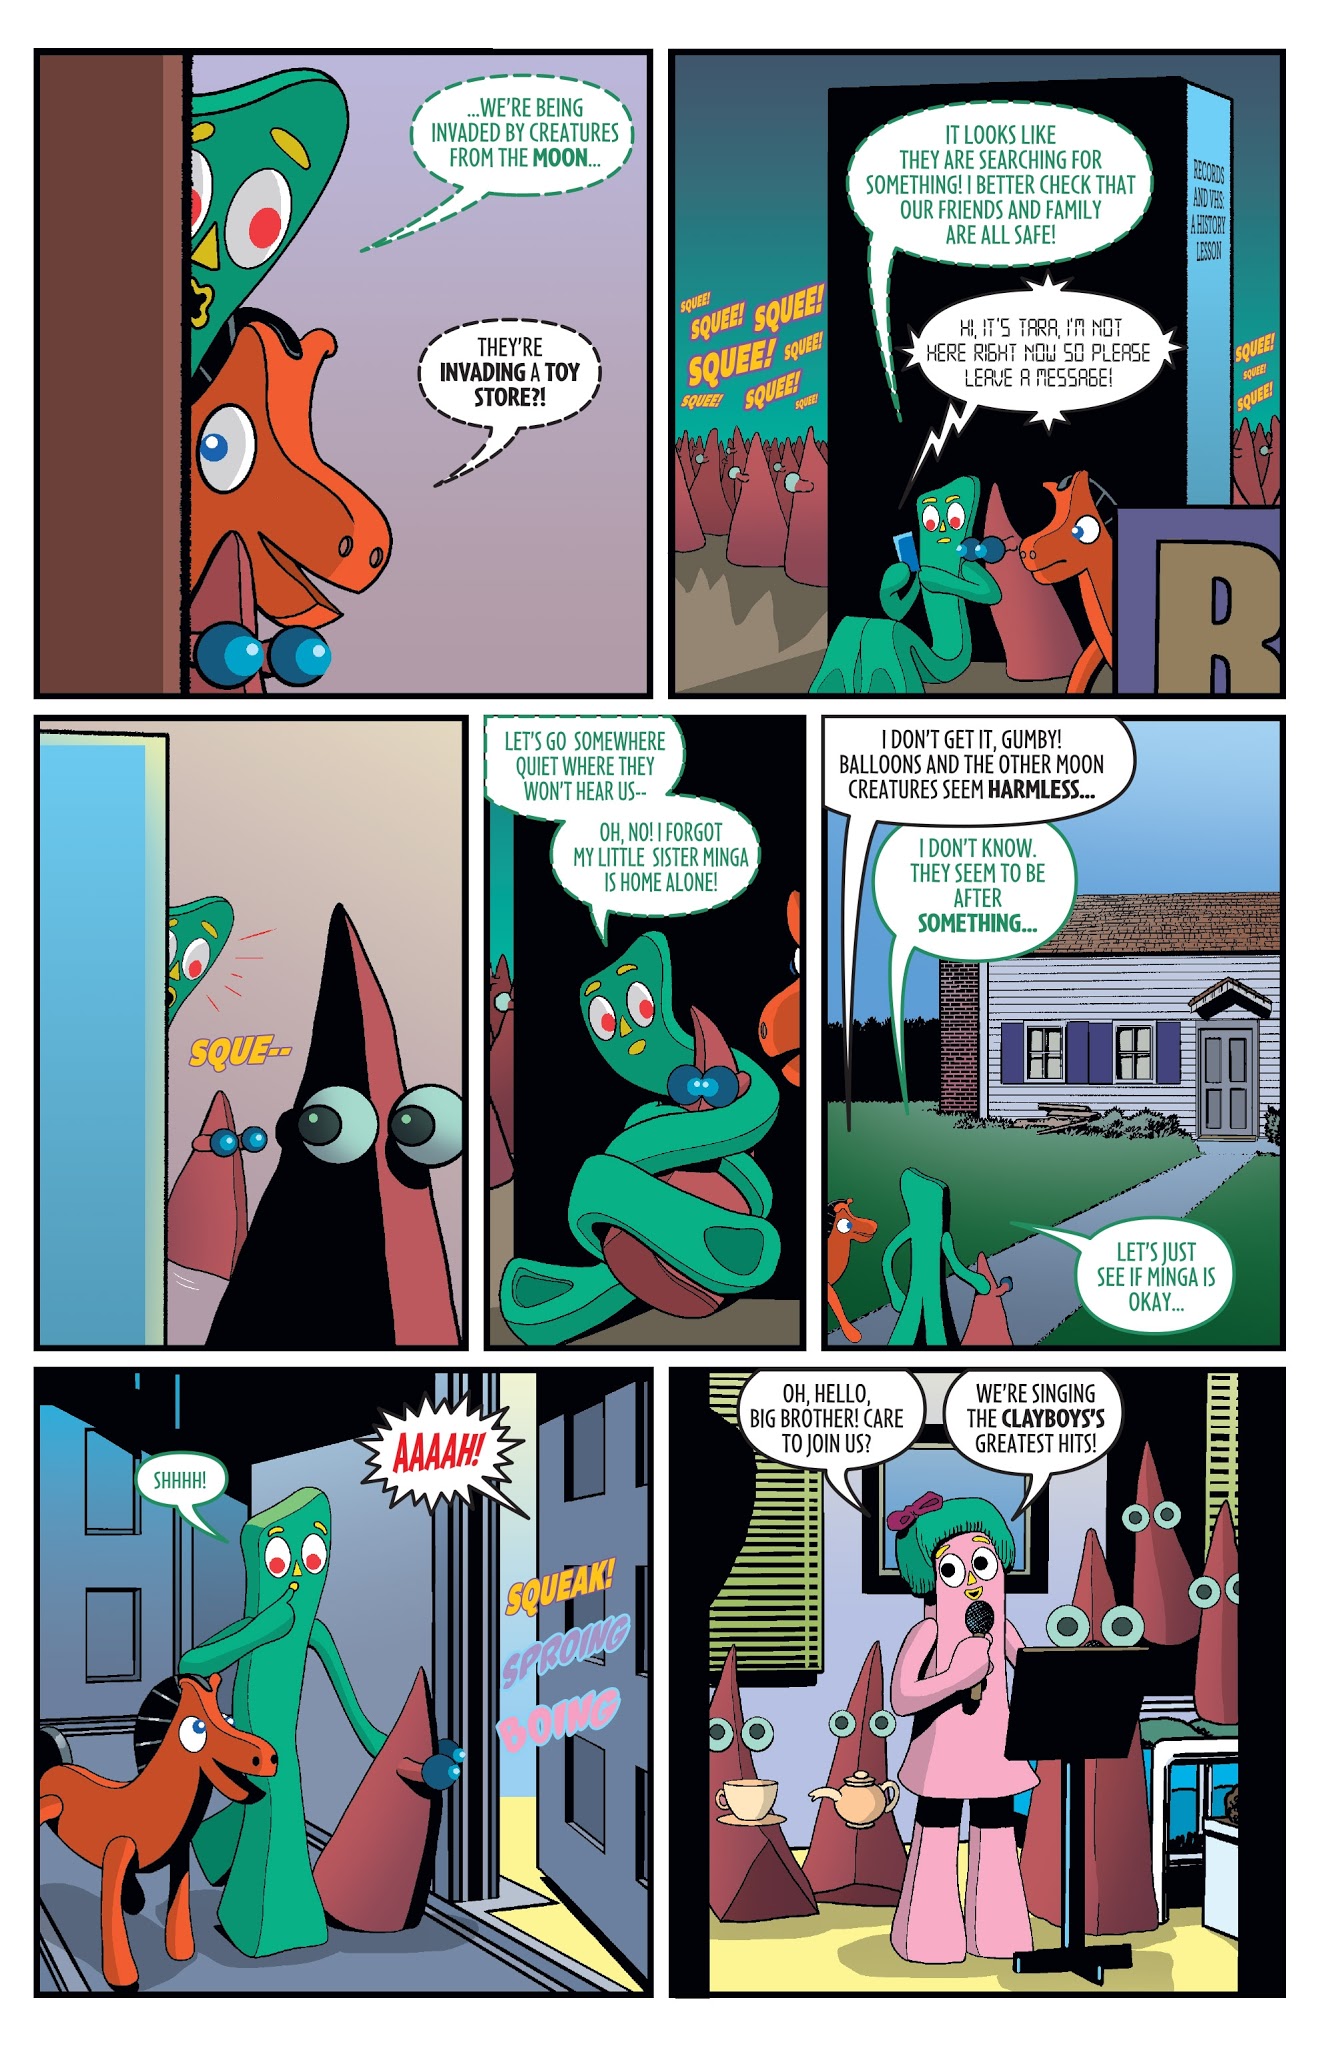 Read online Gumby comic -  Issue #1 - 10